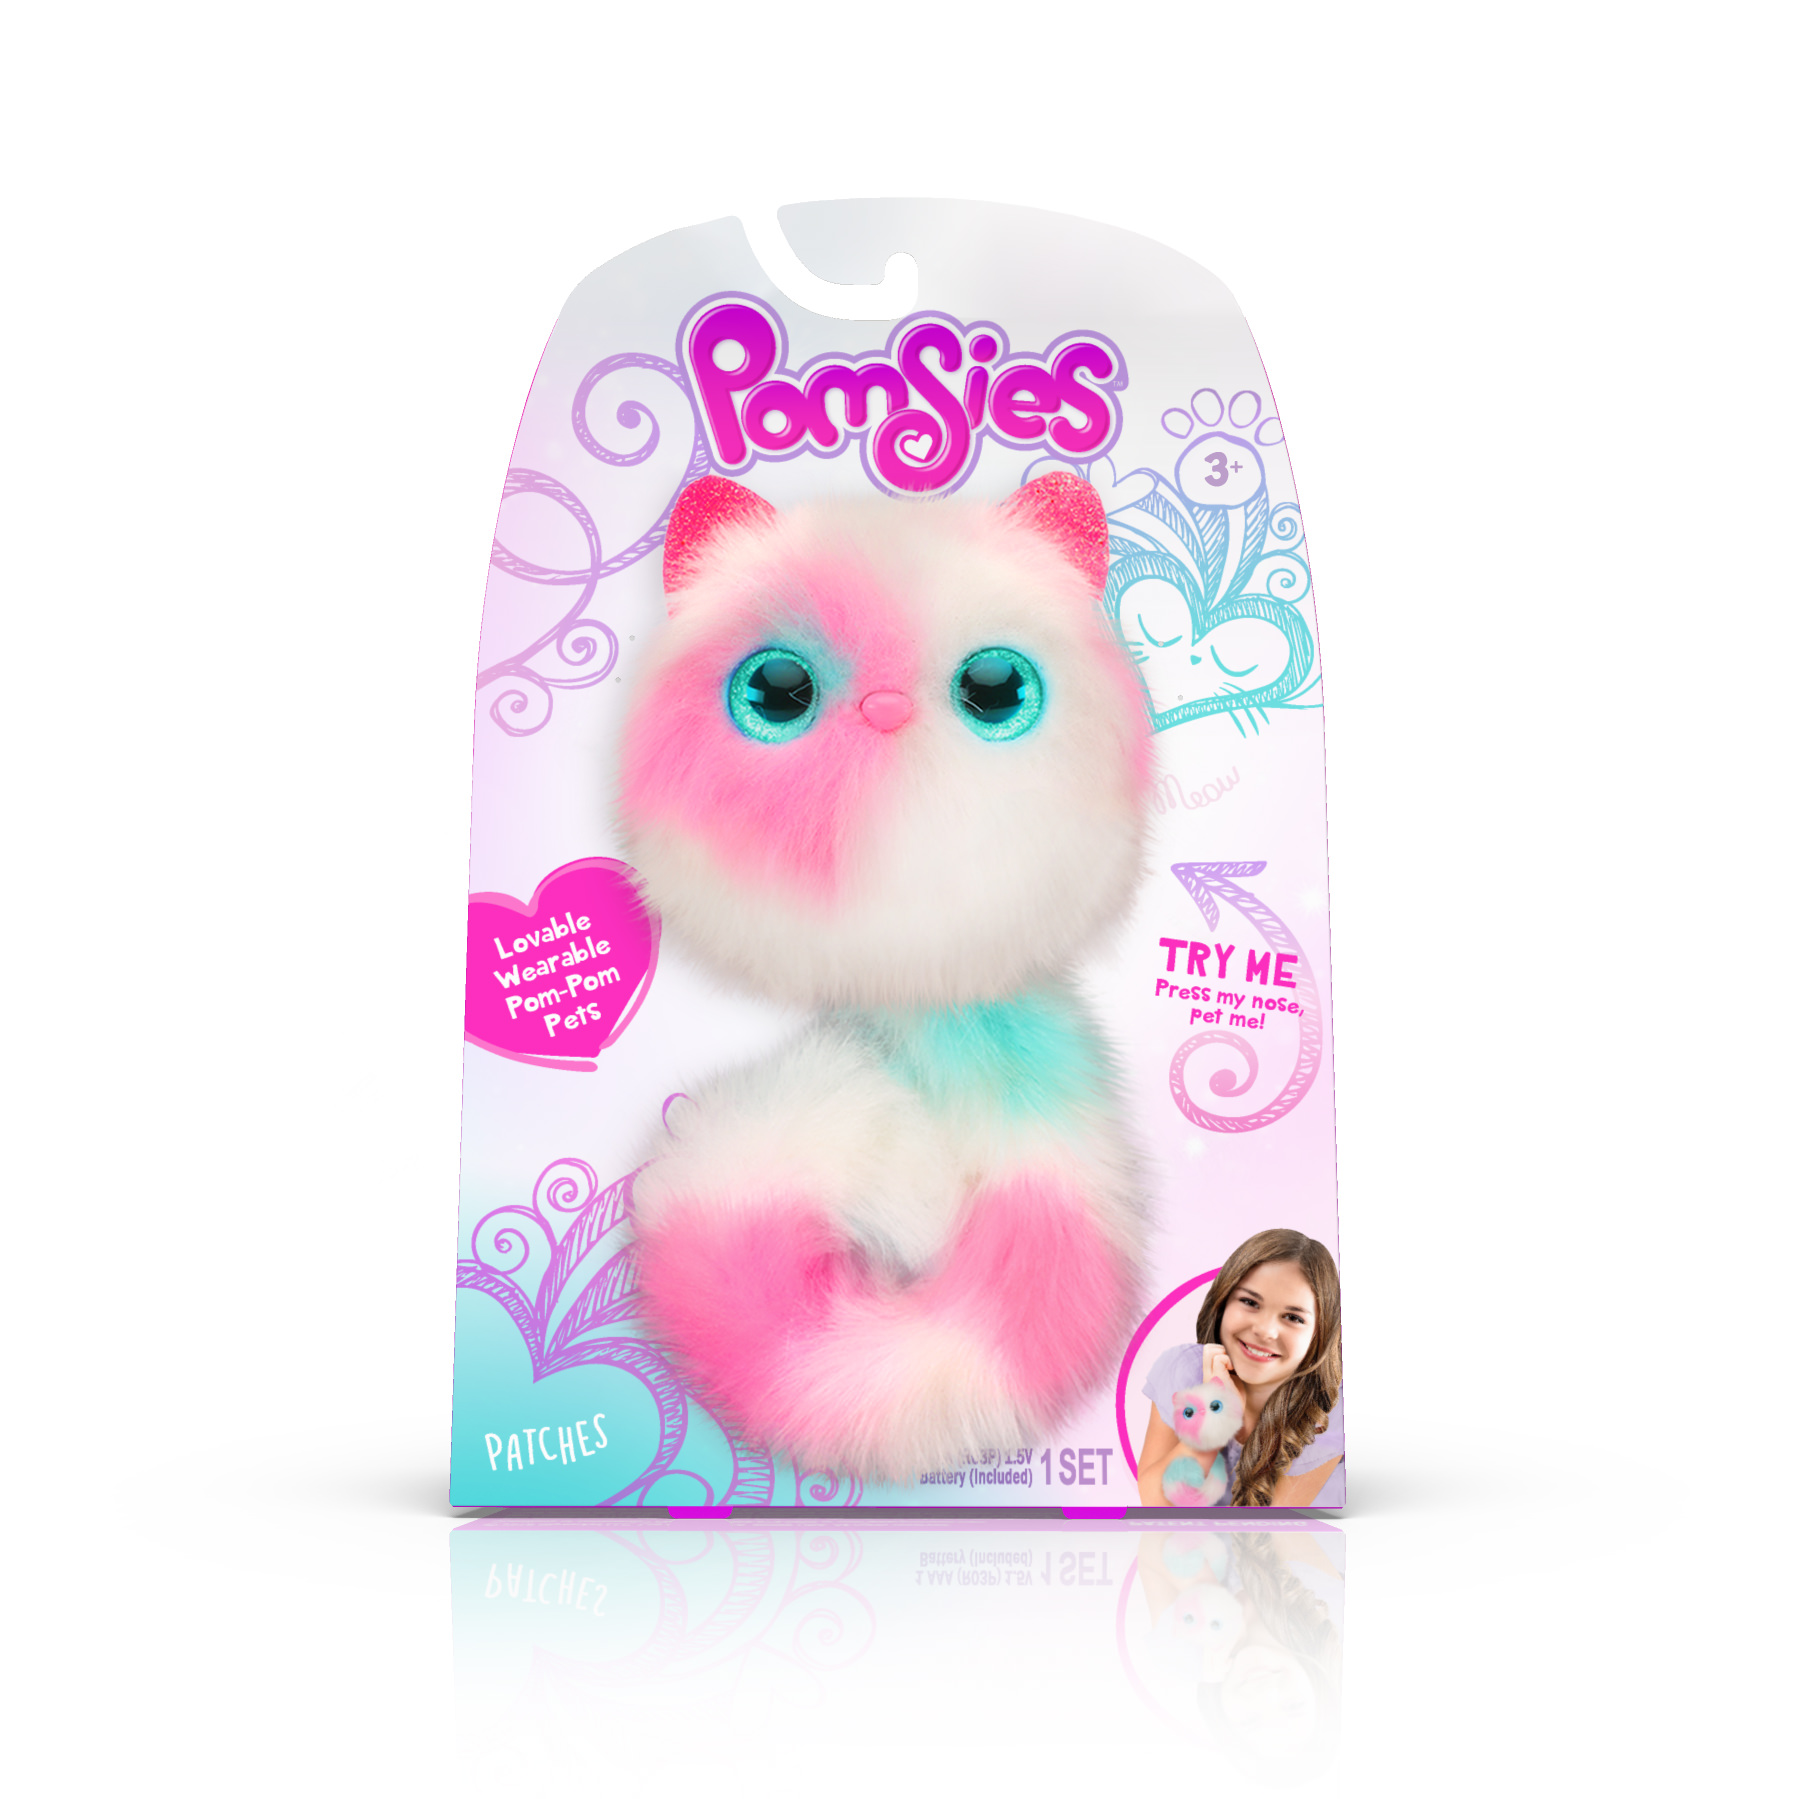 Pomsies Patches Plush Electronic Pet - image 1 of 4